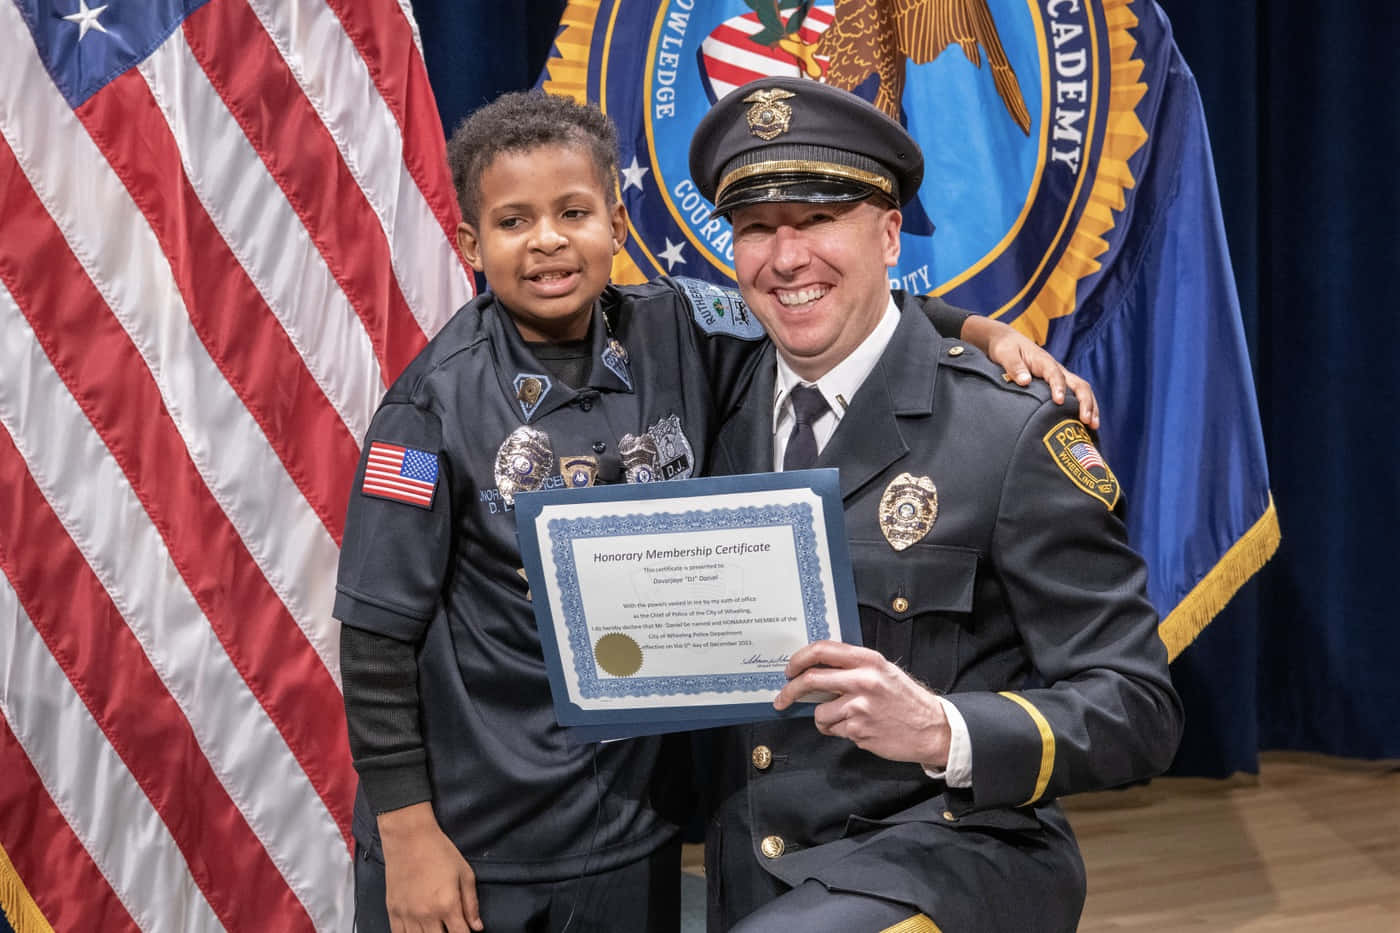 A Police Officer Presents A Certificate To A Young Boy